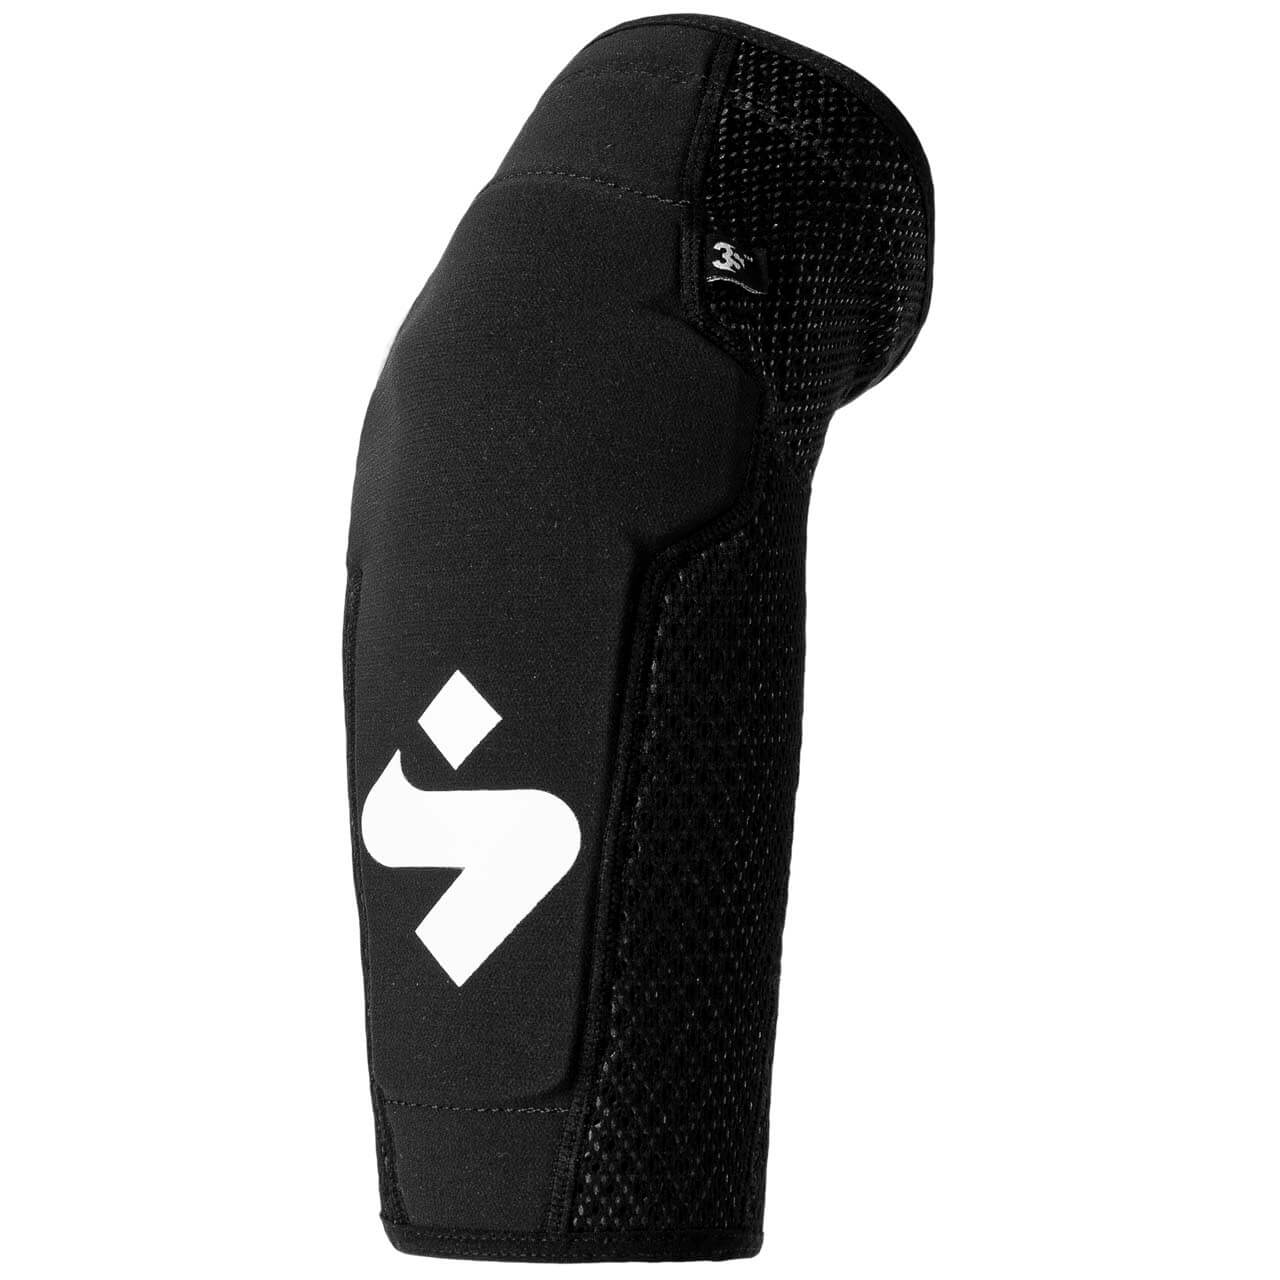 Sweet Protection Knee Guards Light - Black, M von Sweet Protection}